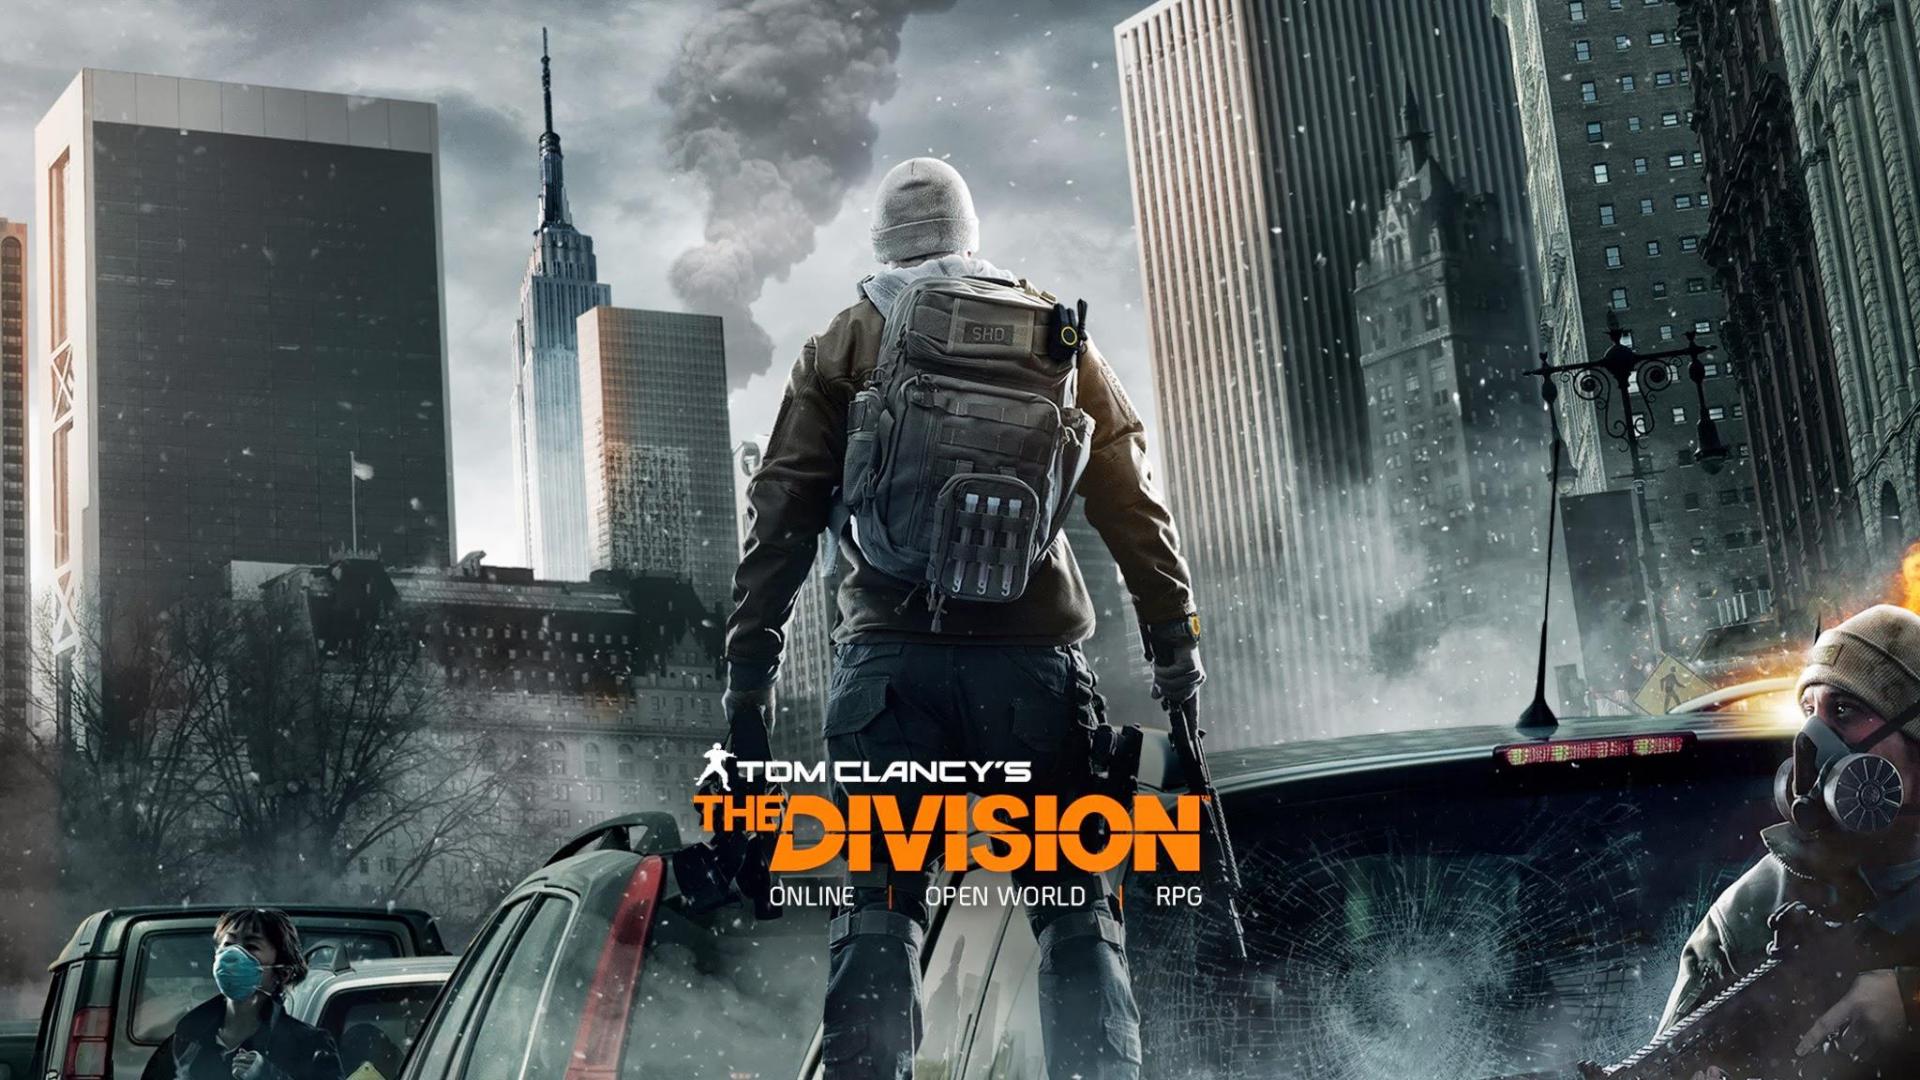 Tom Clancy's The Division Free Weekend On PC